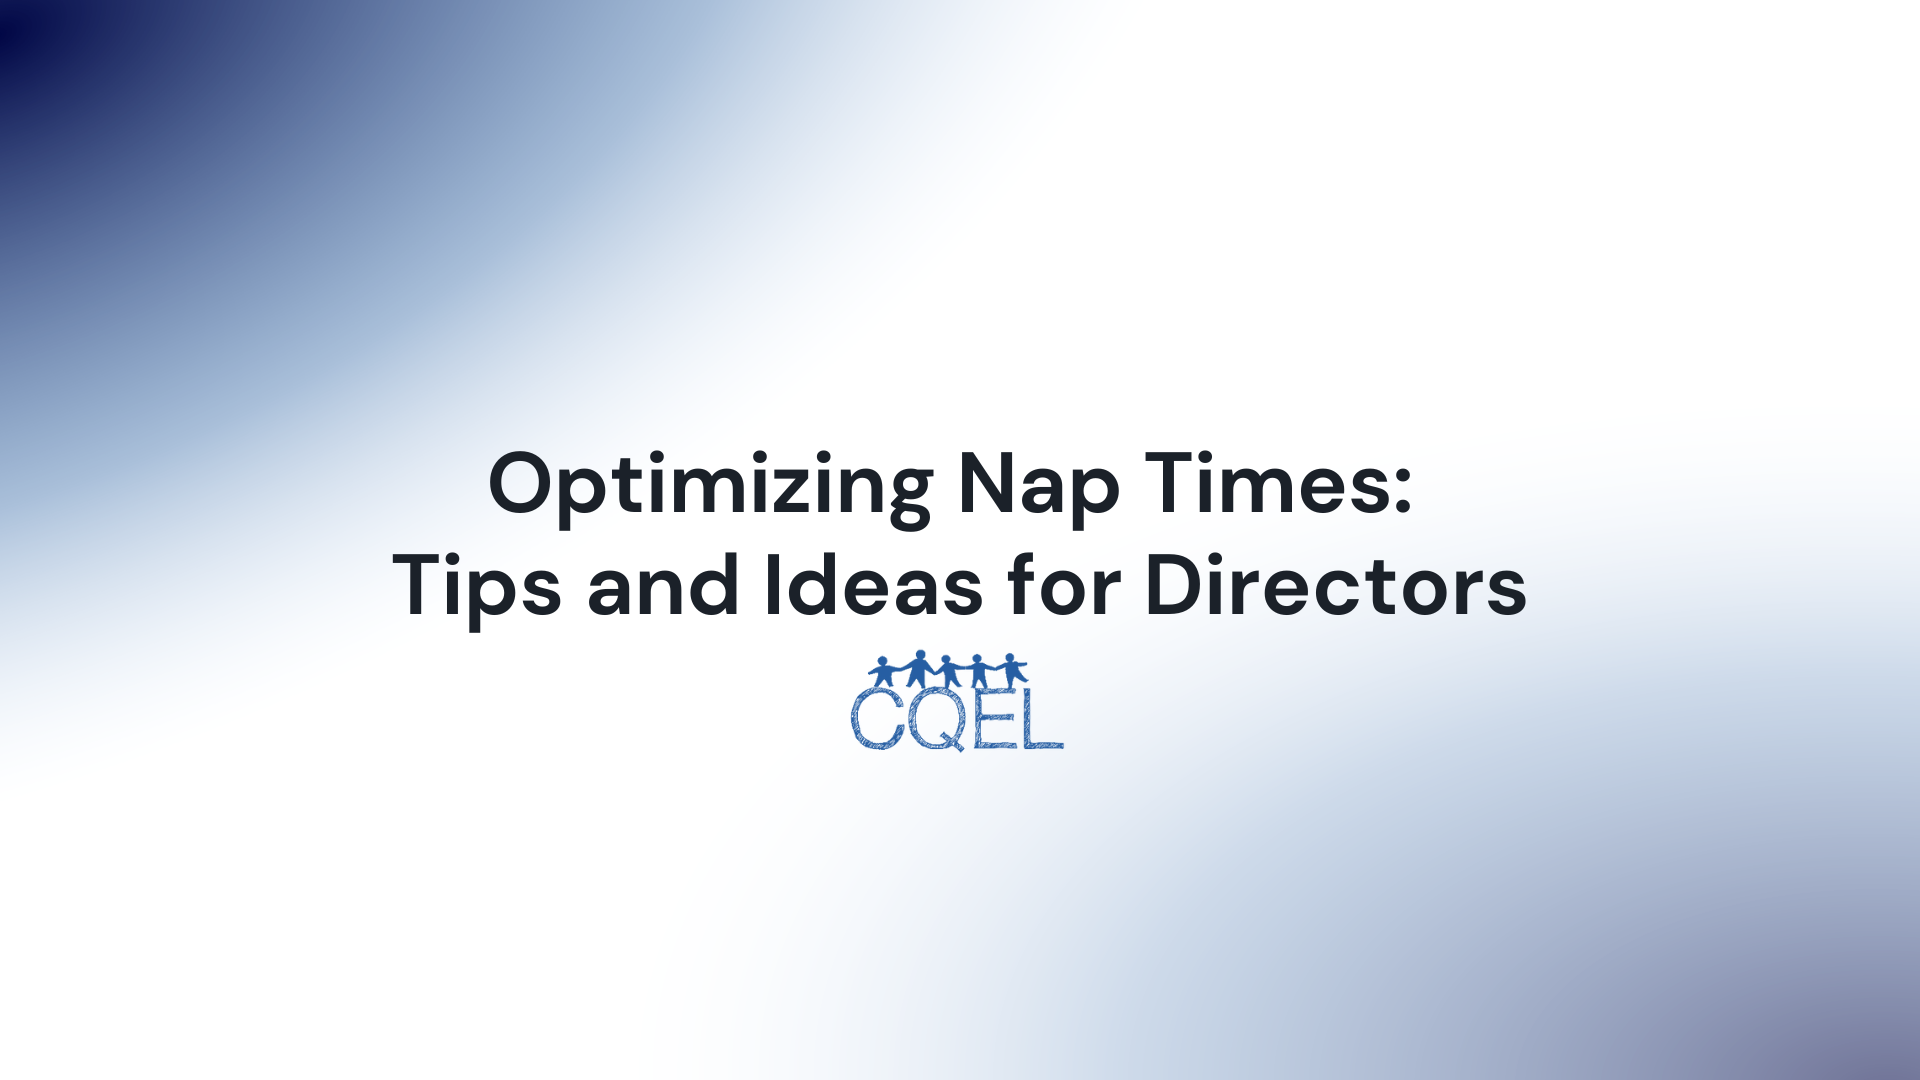 Optimizing Nap Times: Tips and Ideas for Directors